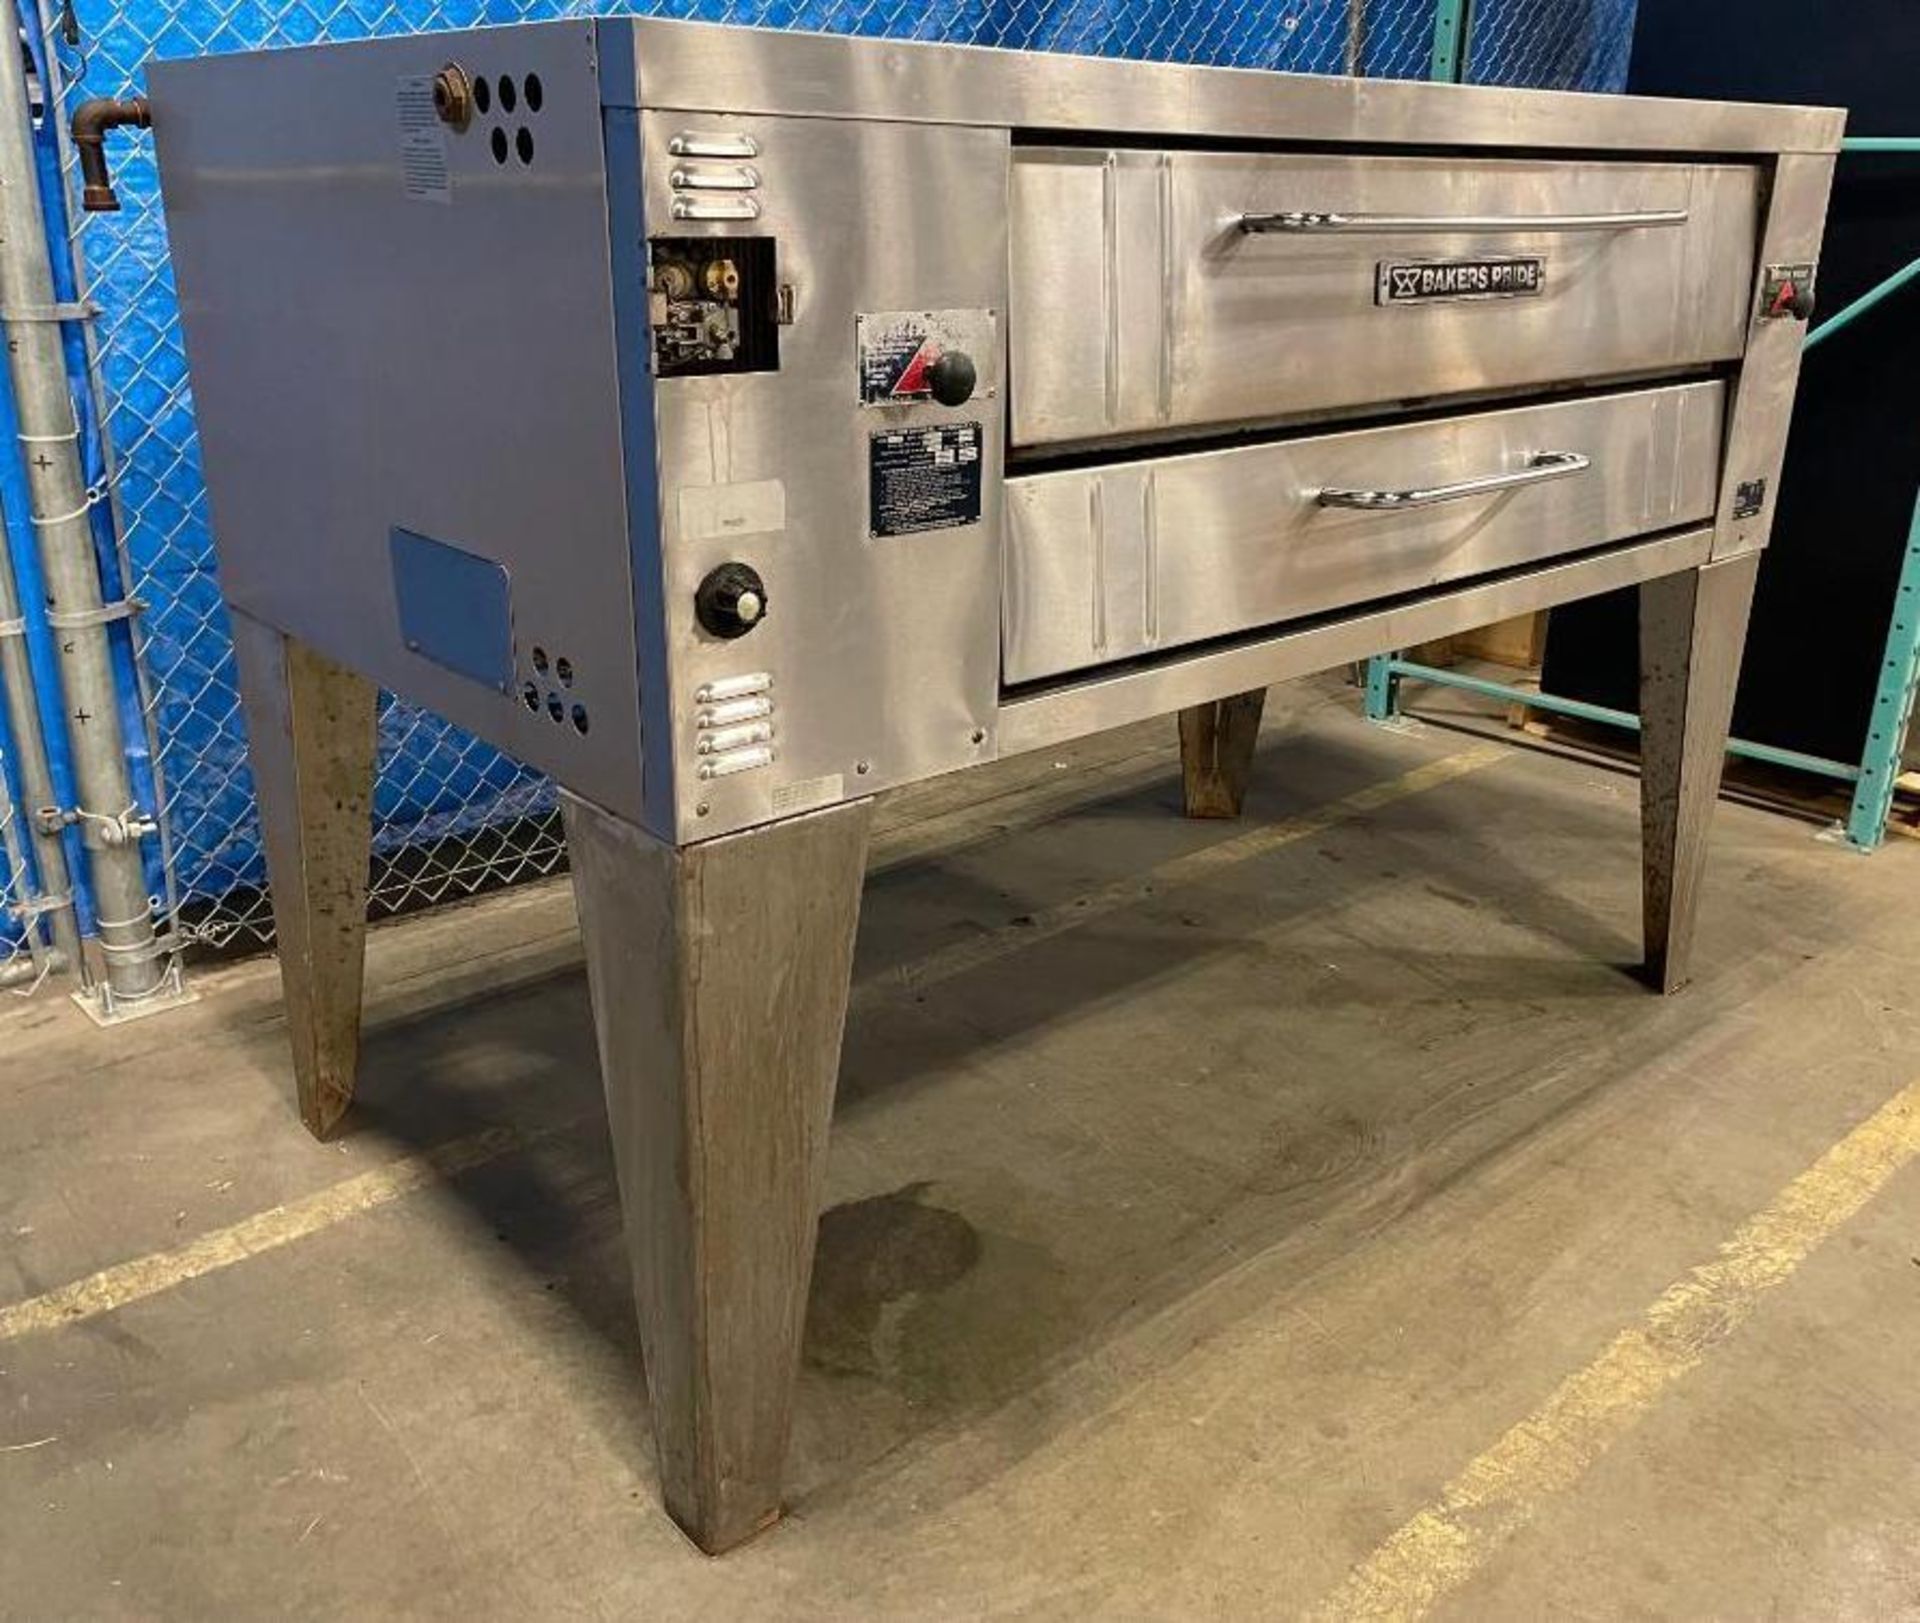 BAKERS PRIDE Y-600 GAS SINGLE DECK PIZZA OVEN - Image 2 of 17